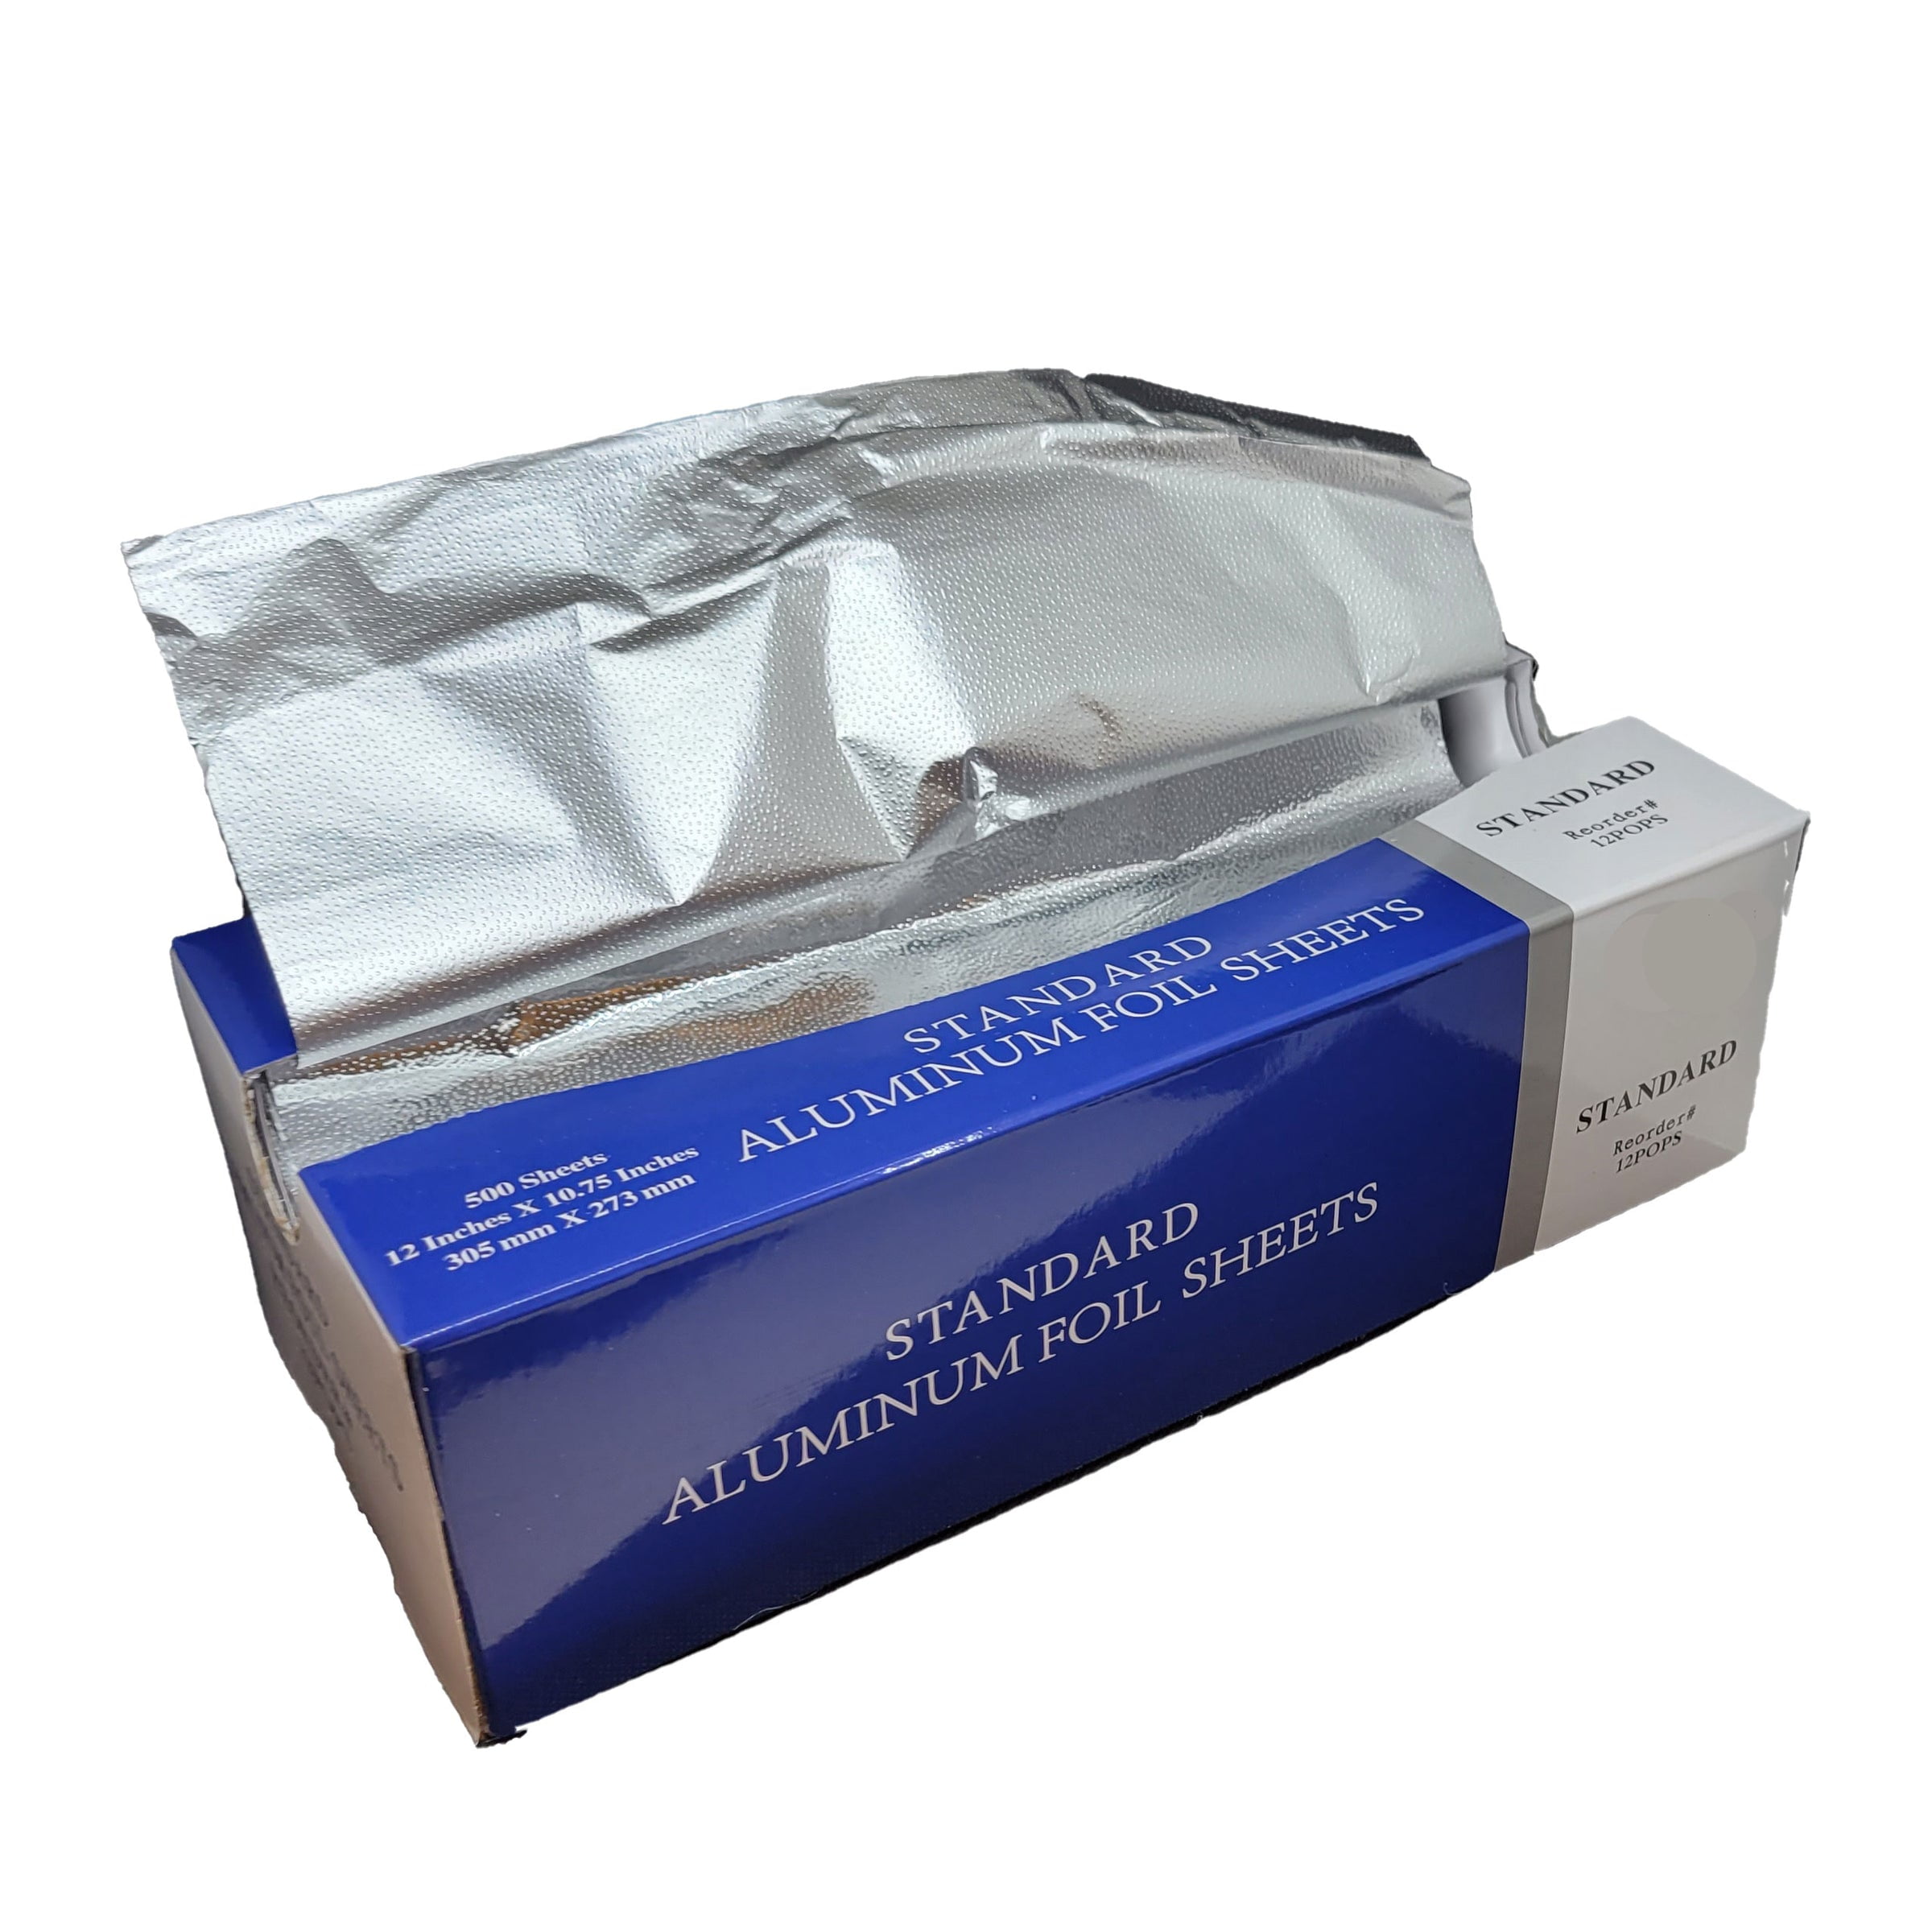 Ox Plastics Freedom Aluminum Foil Wrap, Heavy-Duty, Commercial Grade for  Food Service Industry, Silver Foil for Cooking, Roasting, Baking, BBQ &  Parties